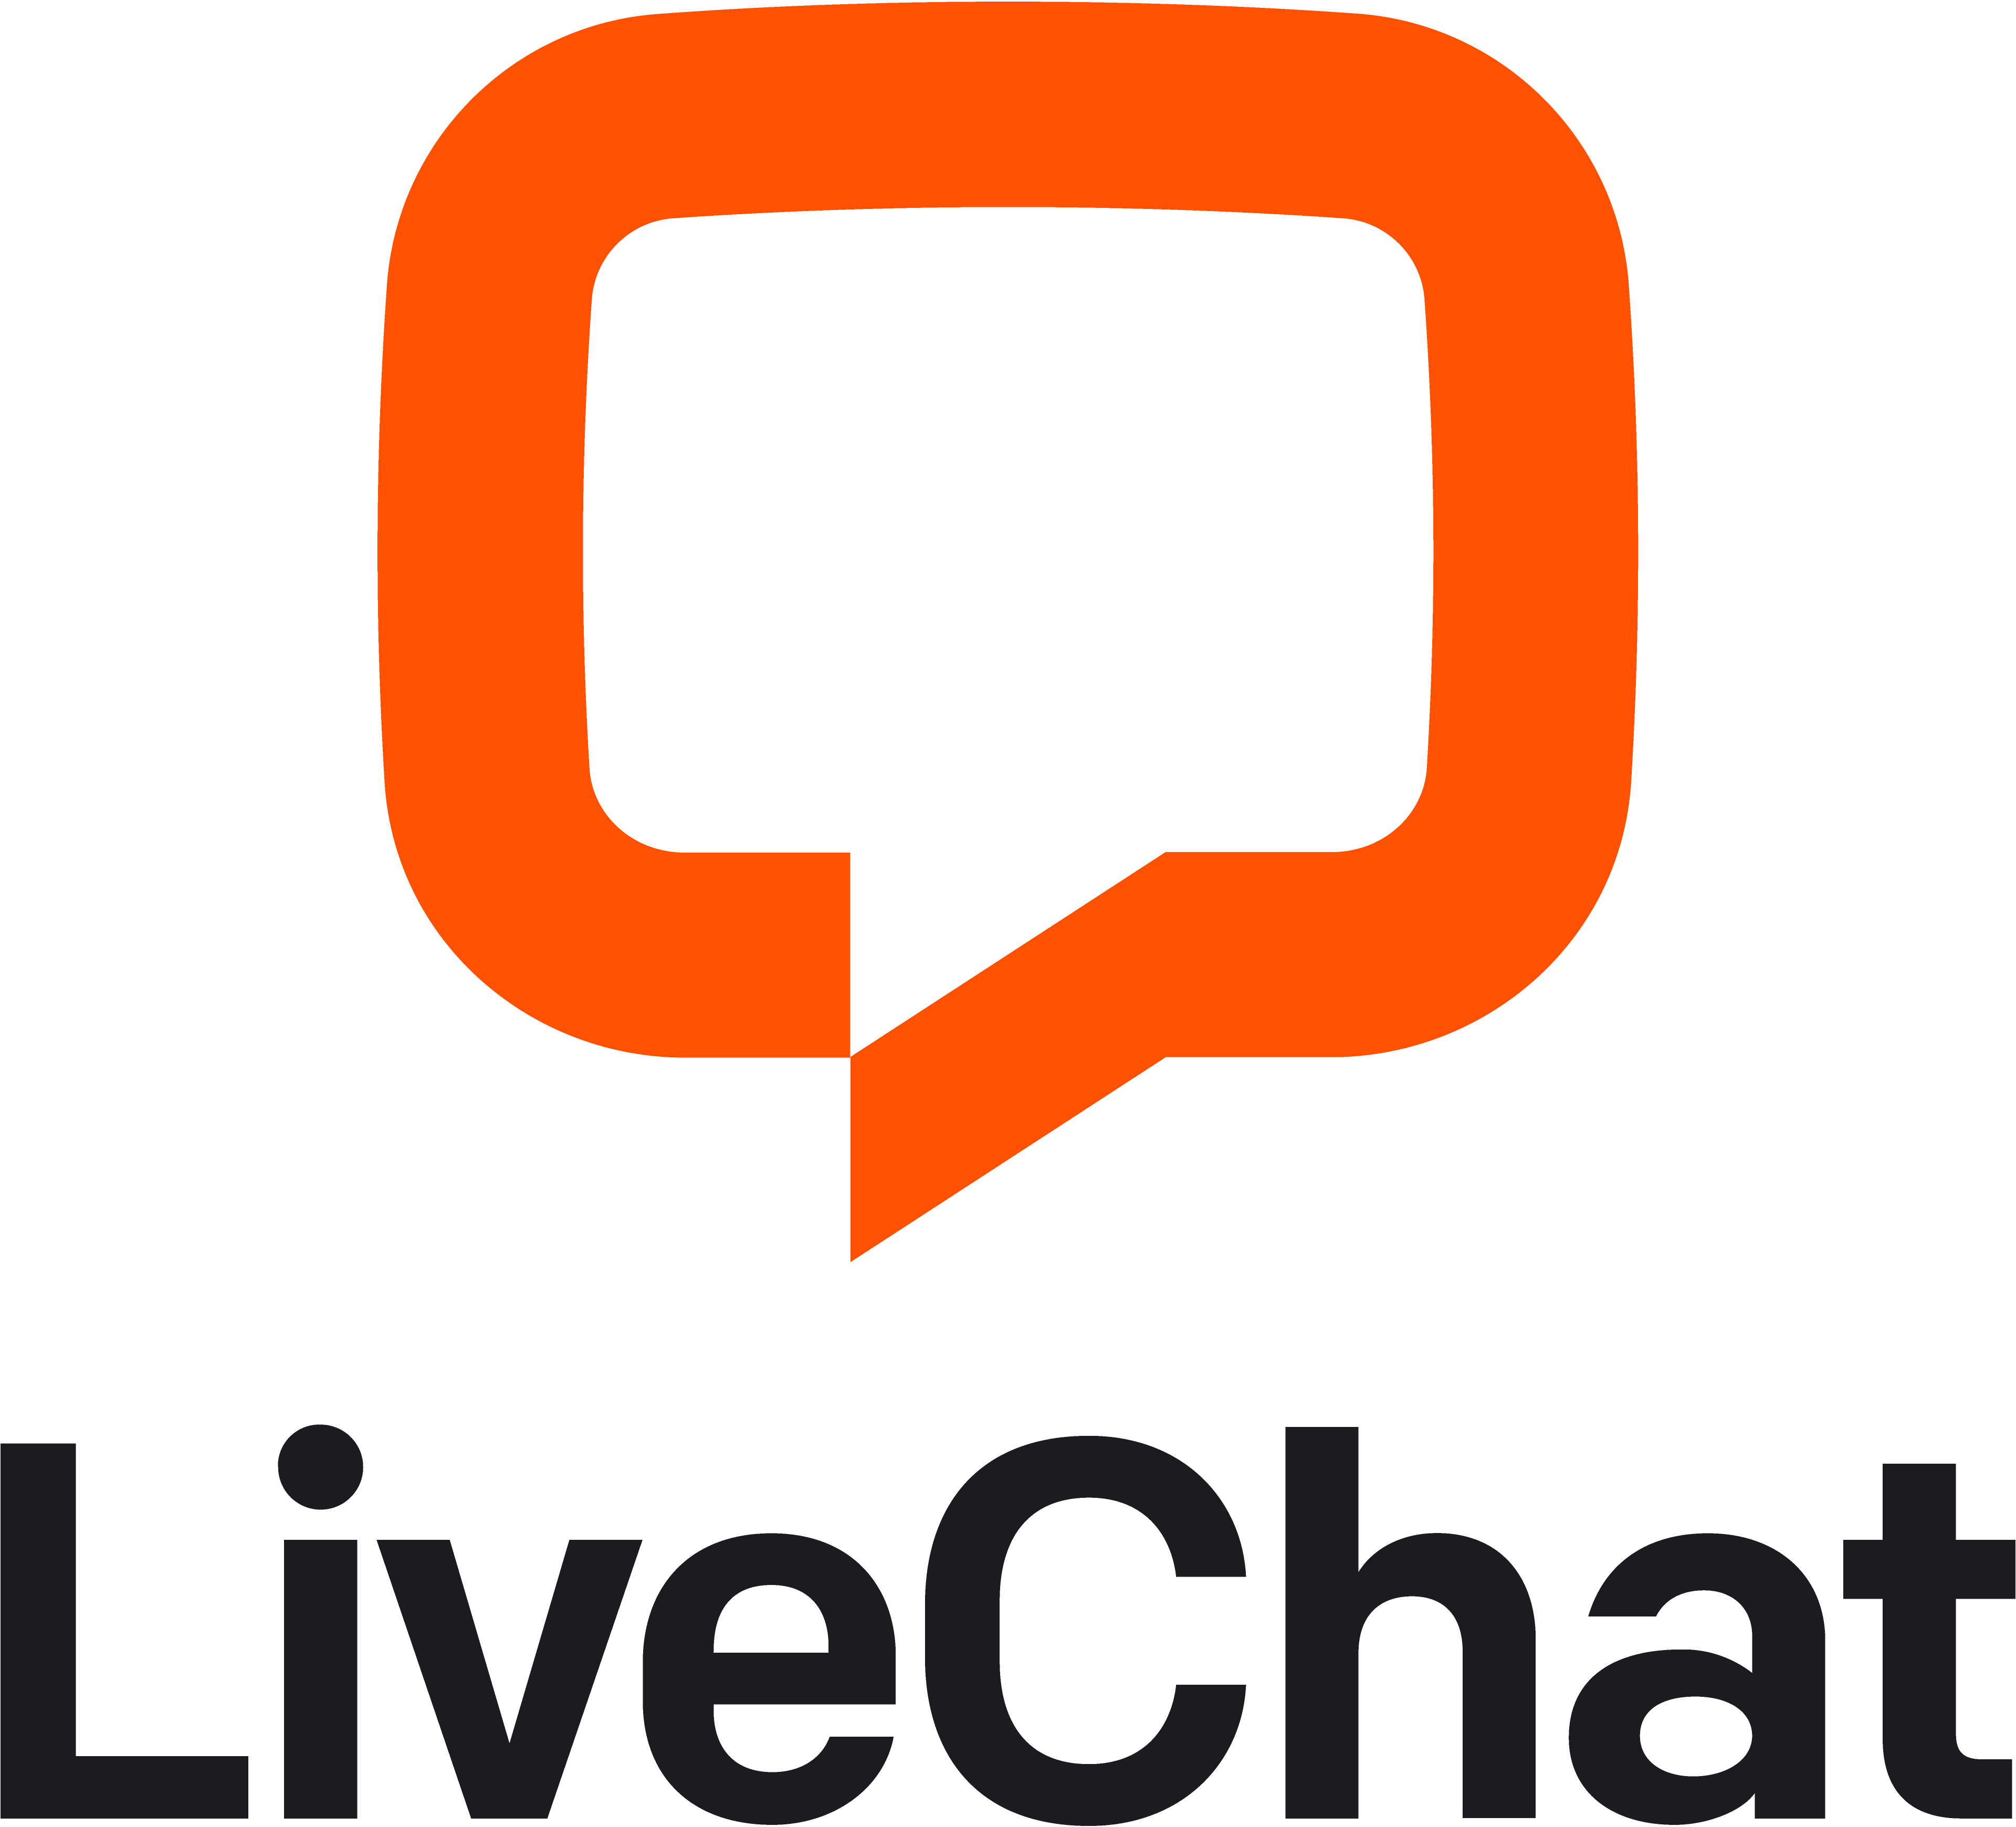 Livechat Weed Shop Logo